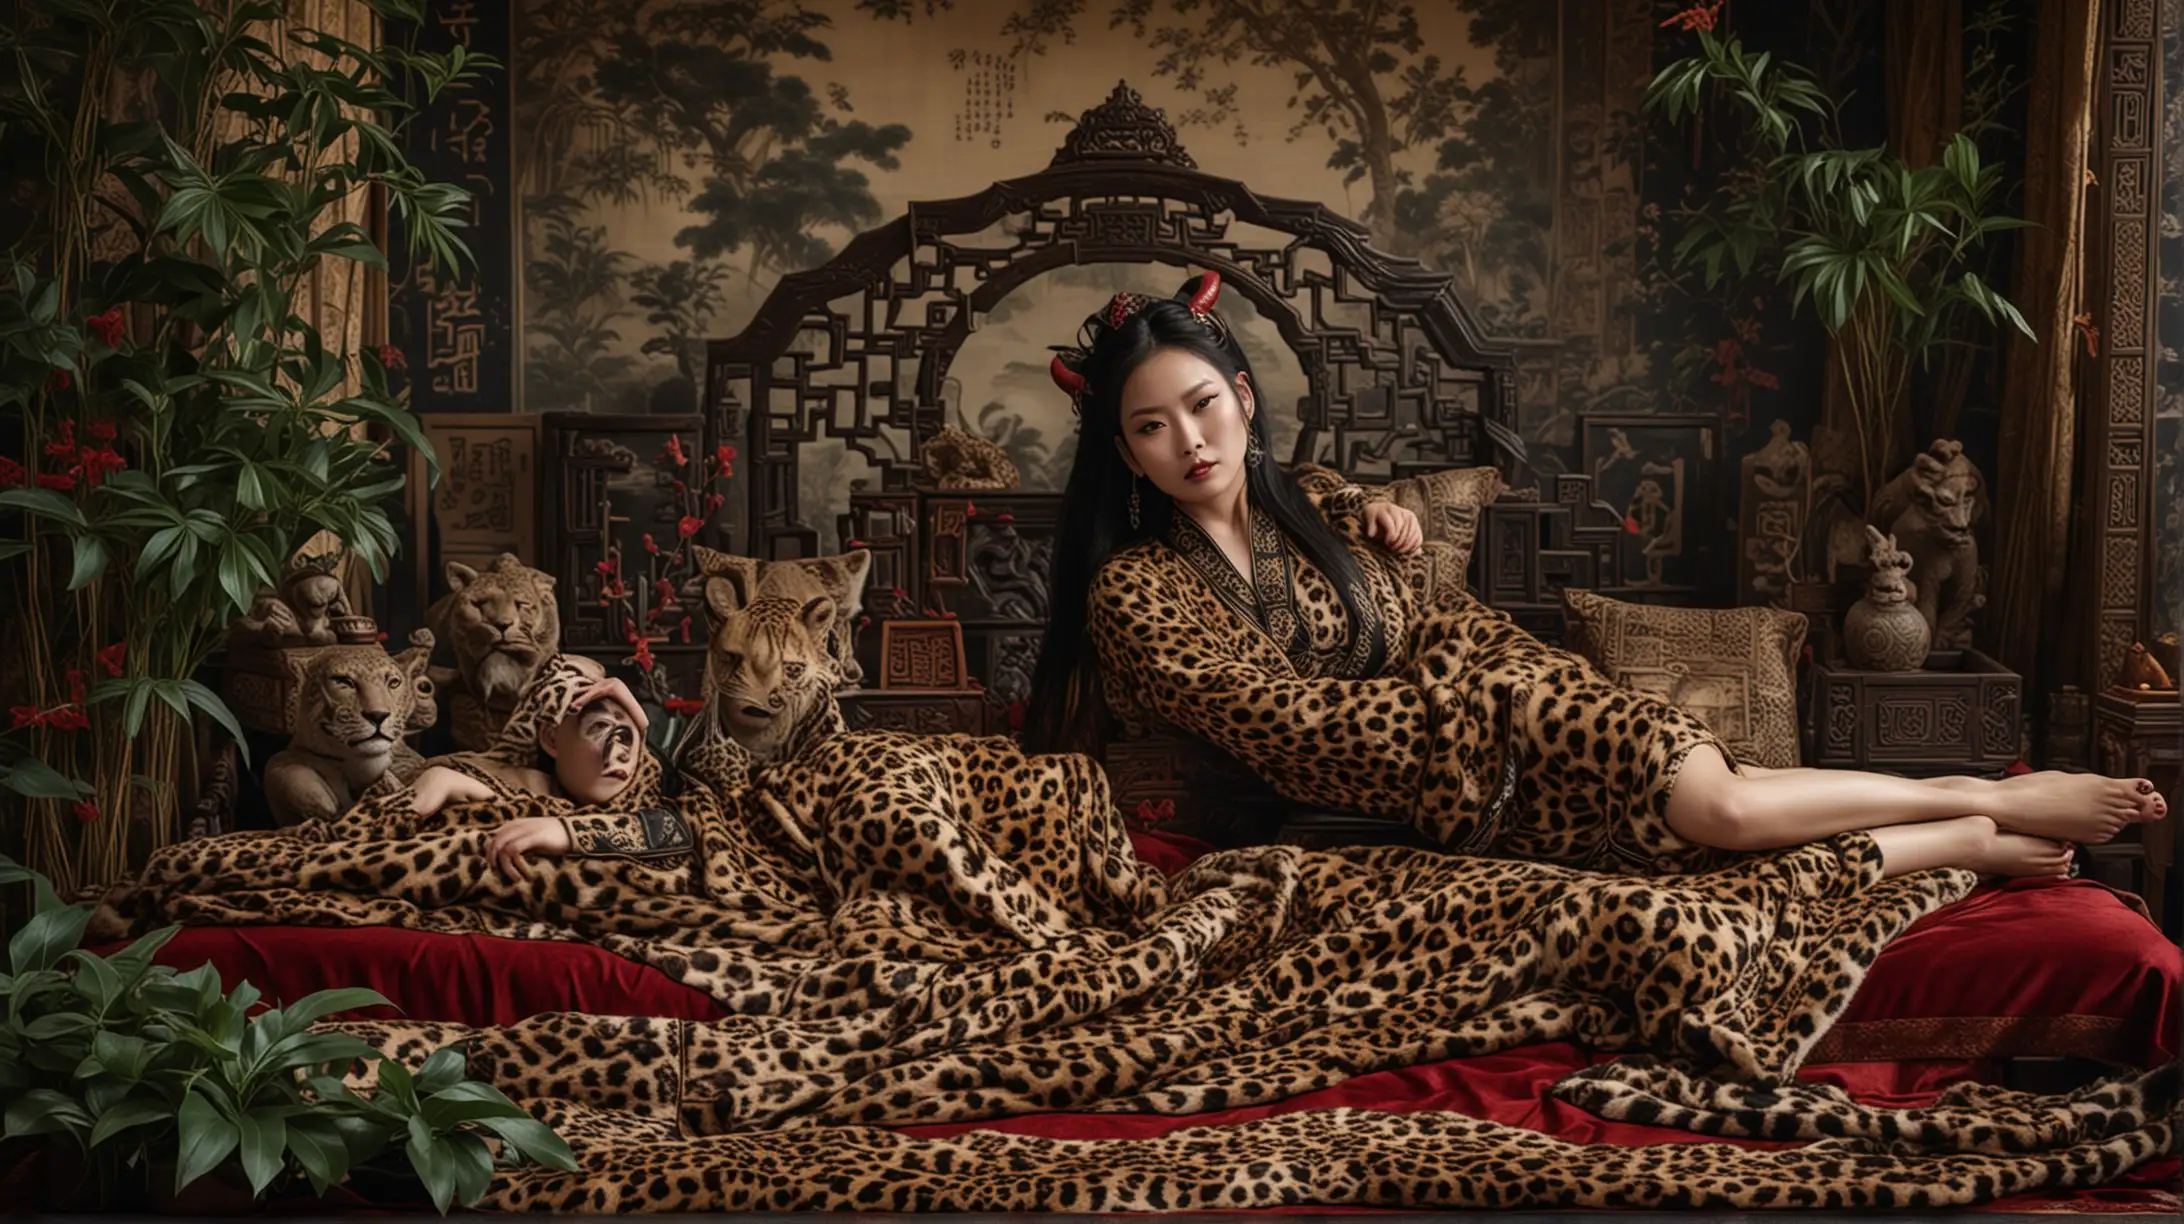 Sensual Chinese Devil Woman Reclining on Leopard Skin Bed with Occult Symbols